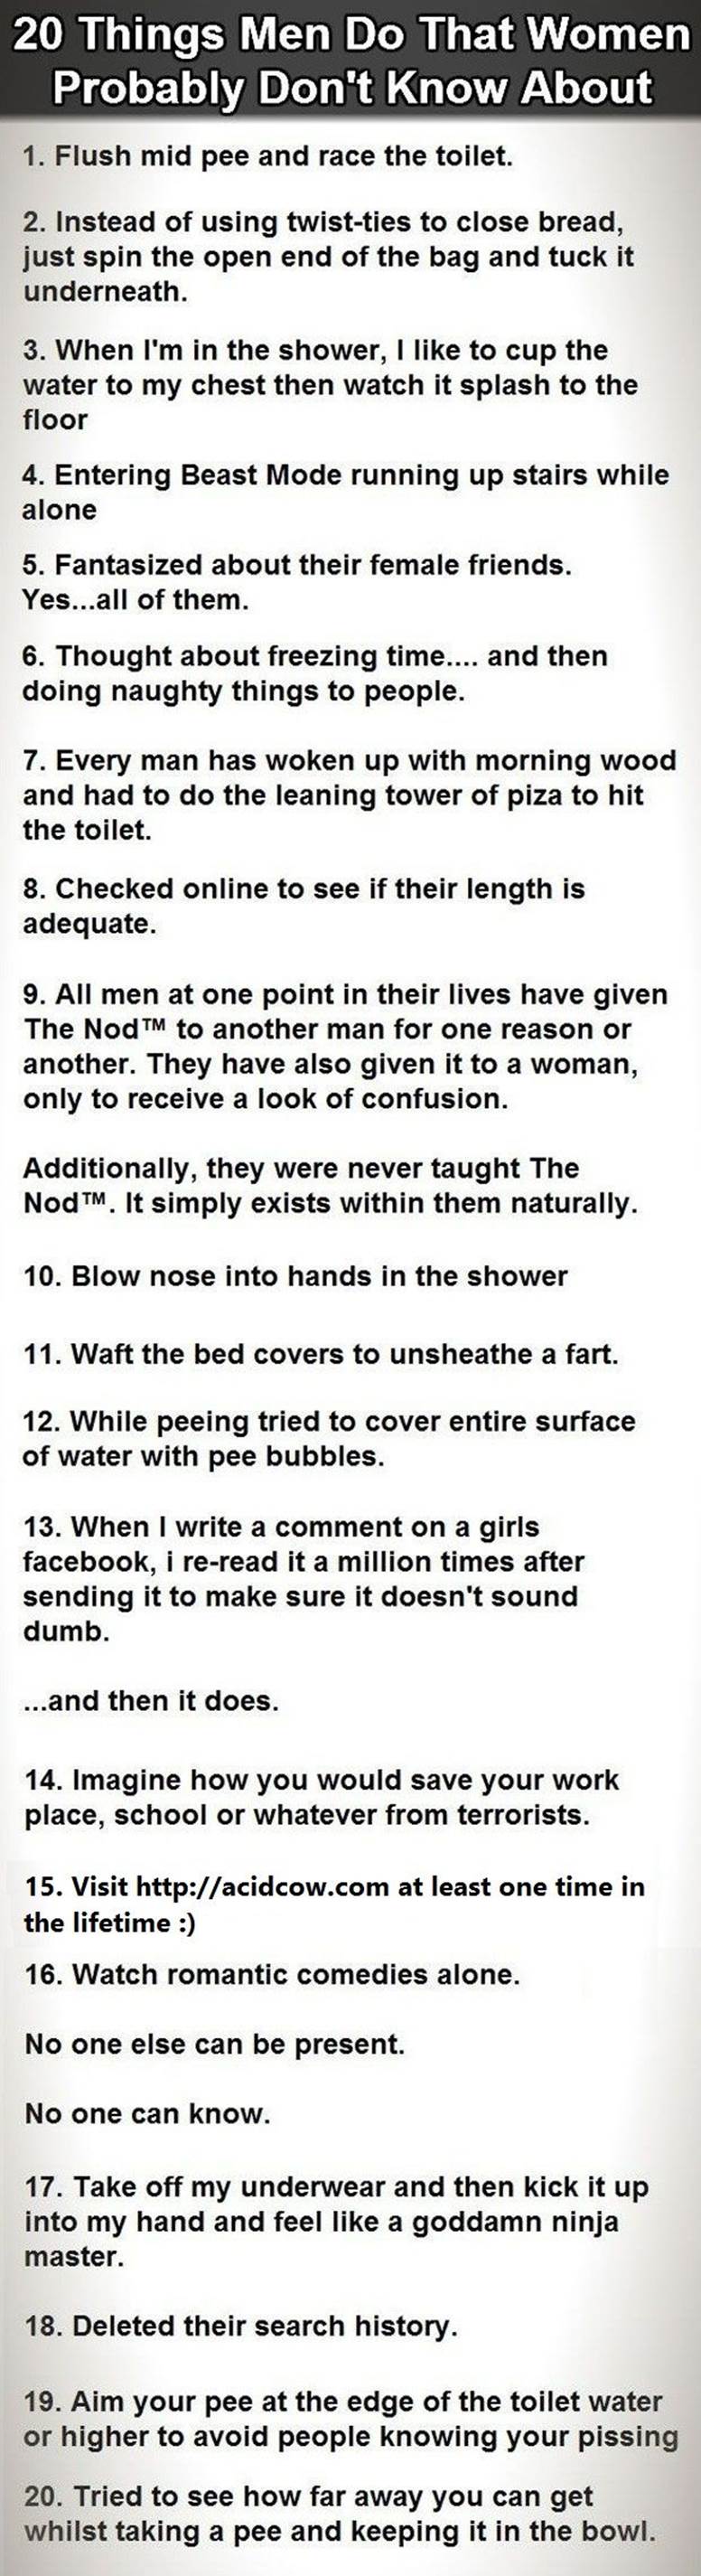 20-Things-Men-Do-That-Women-Dont-Know-About1